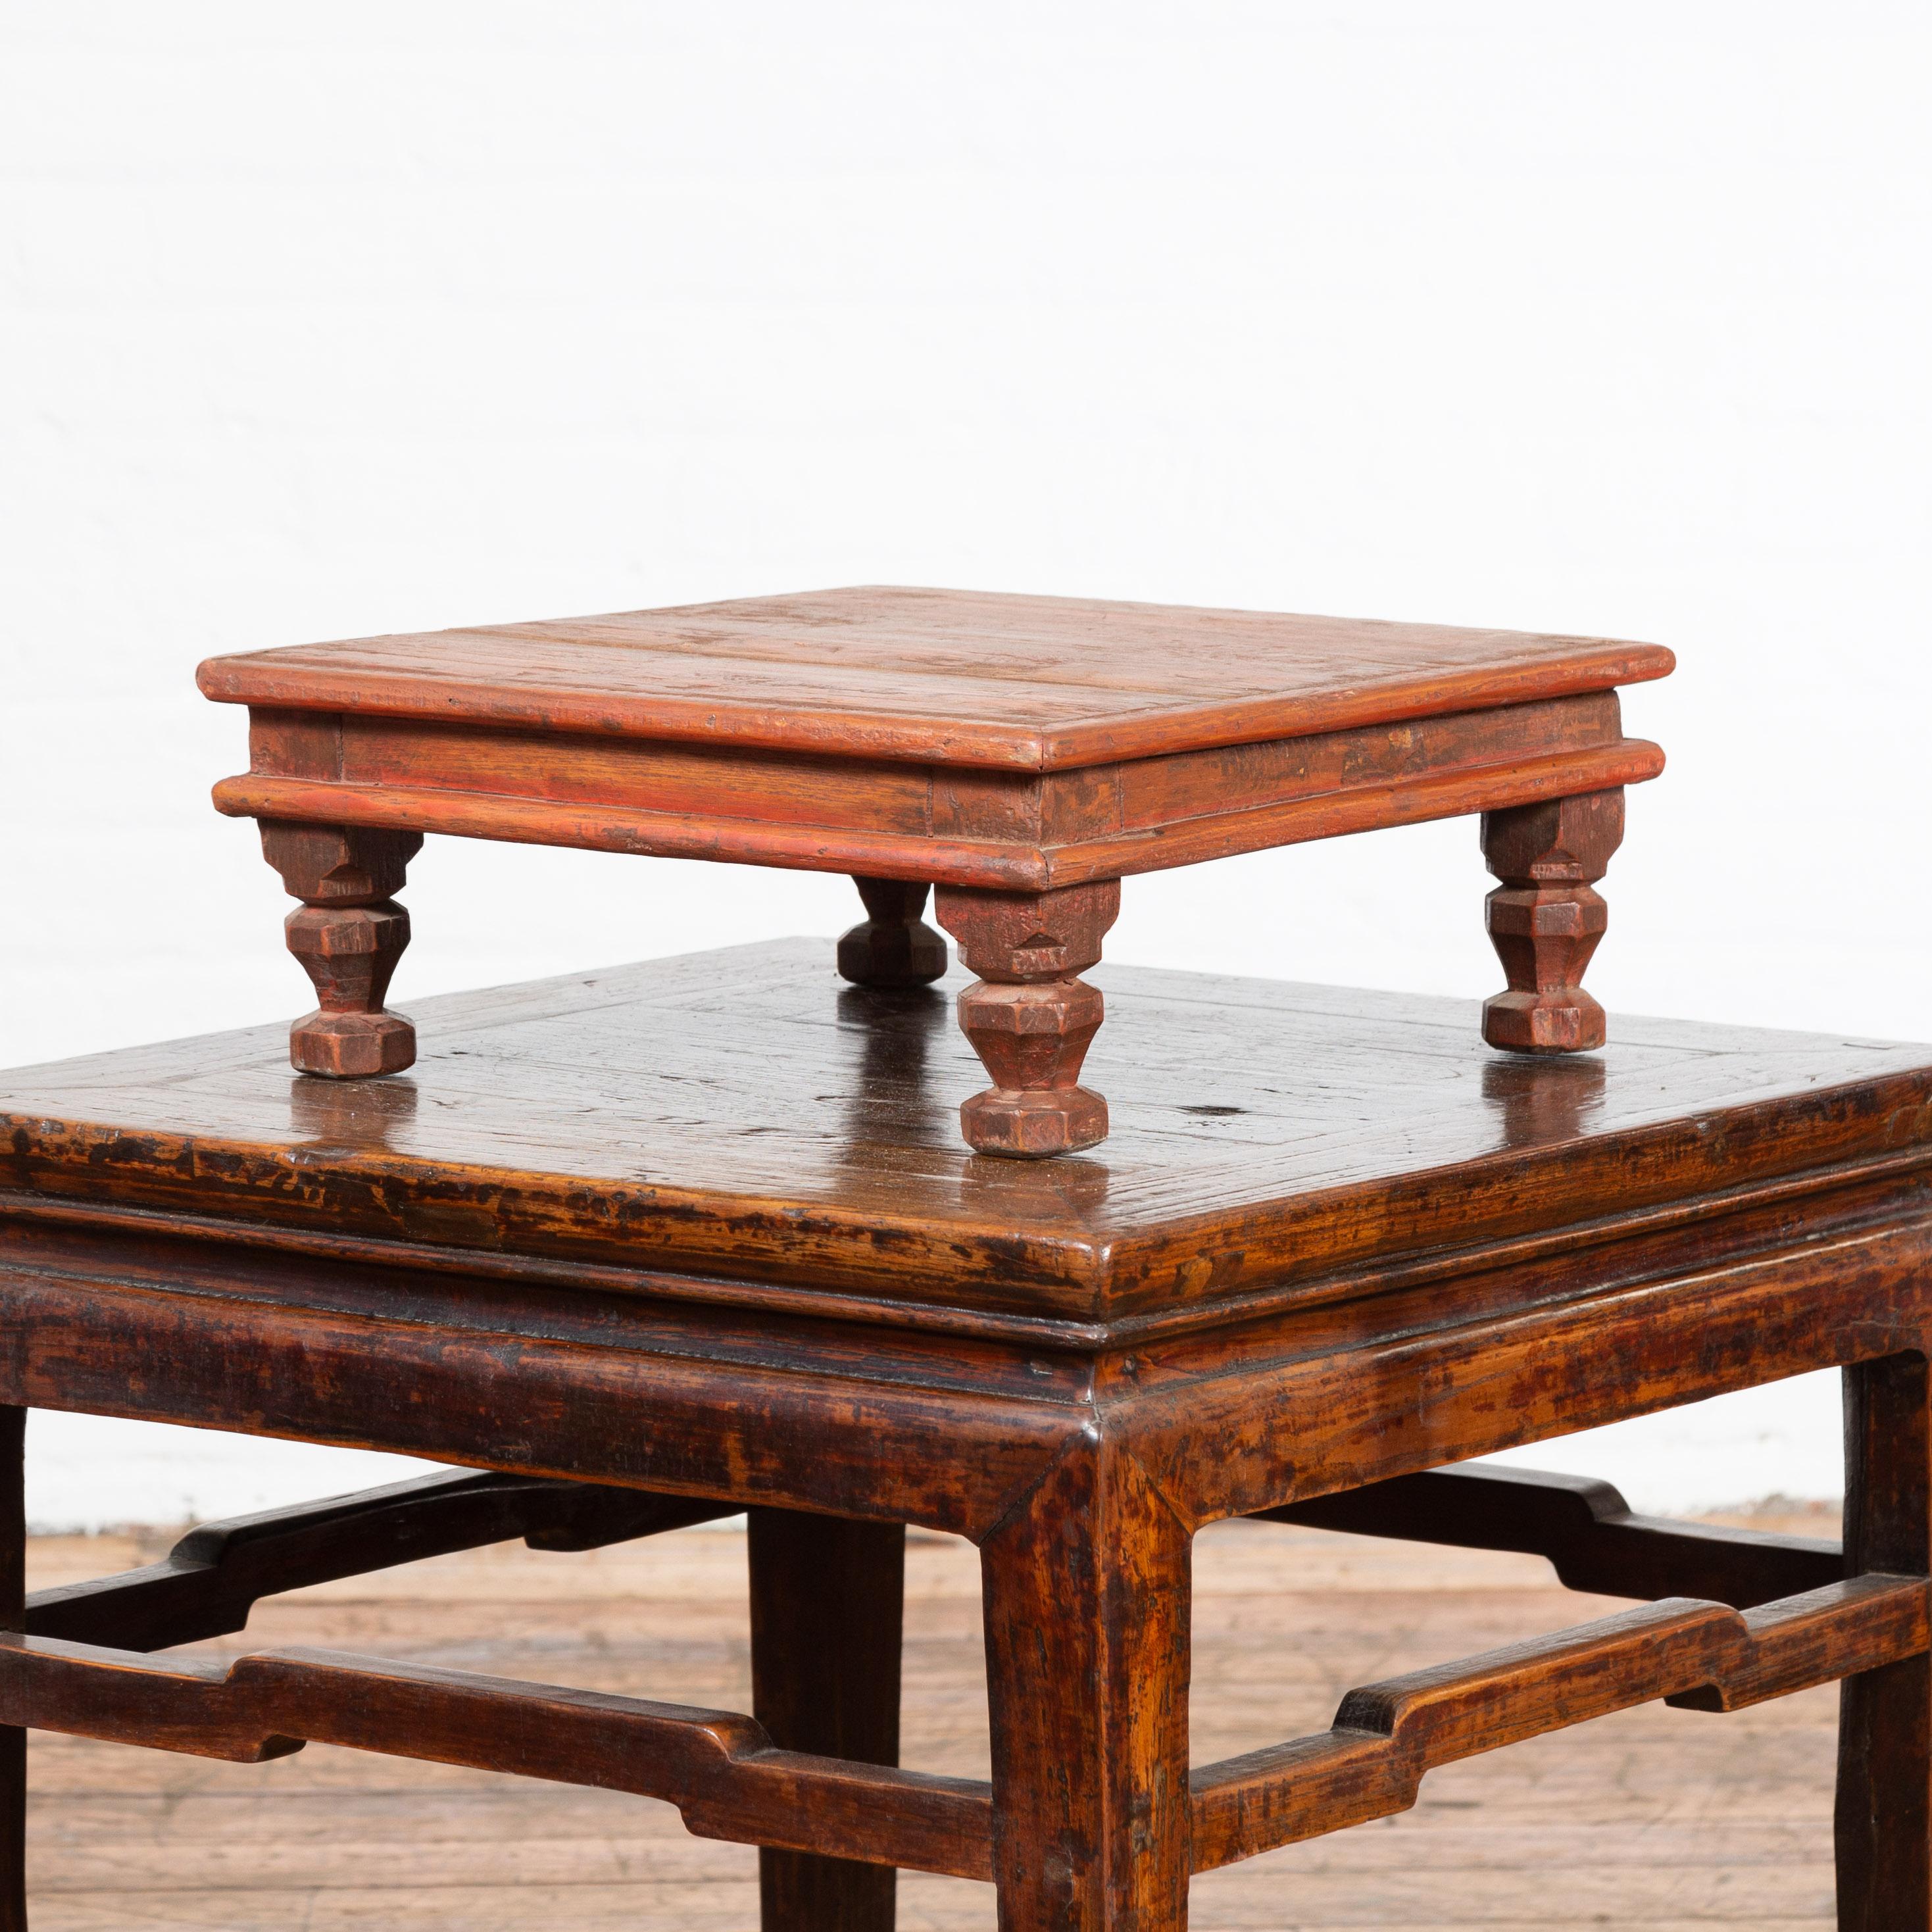 An Indian vintage low wooden prayer table from the mid 20th century, with carved legs. Created in India during the midcentury period, this vintage wooden prayer table features a square planked top sitting above a recessed apron. Four small carved